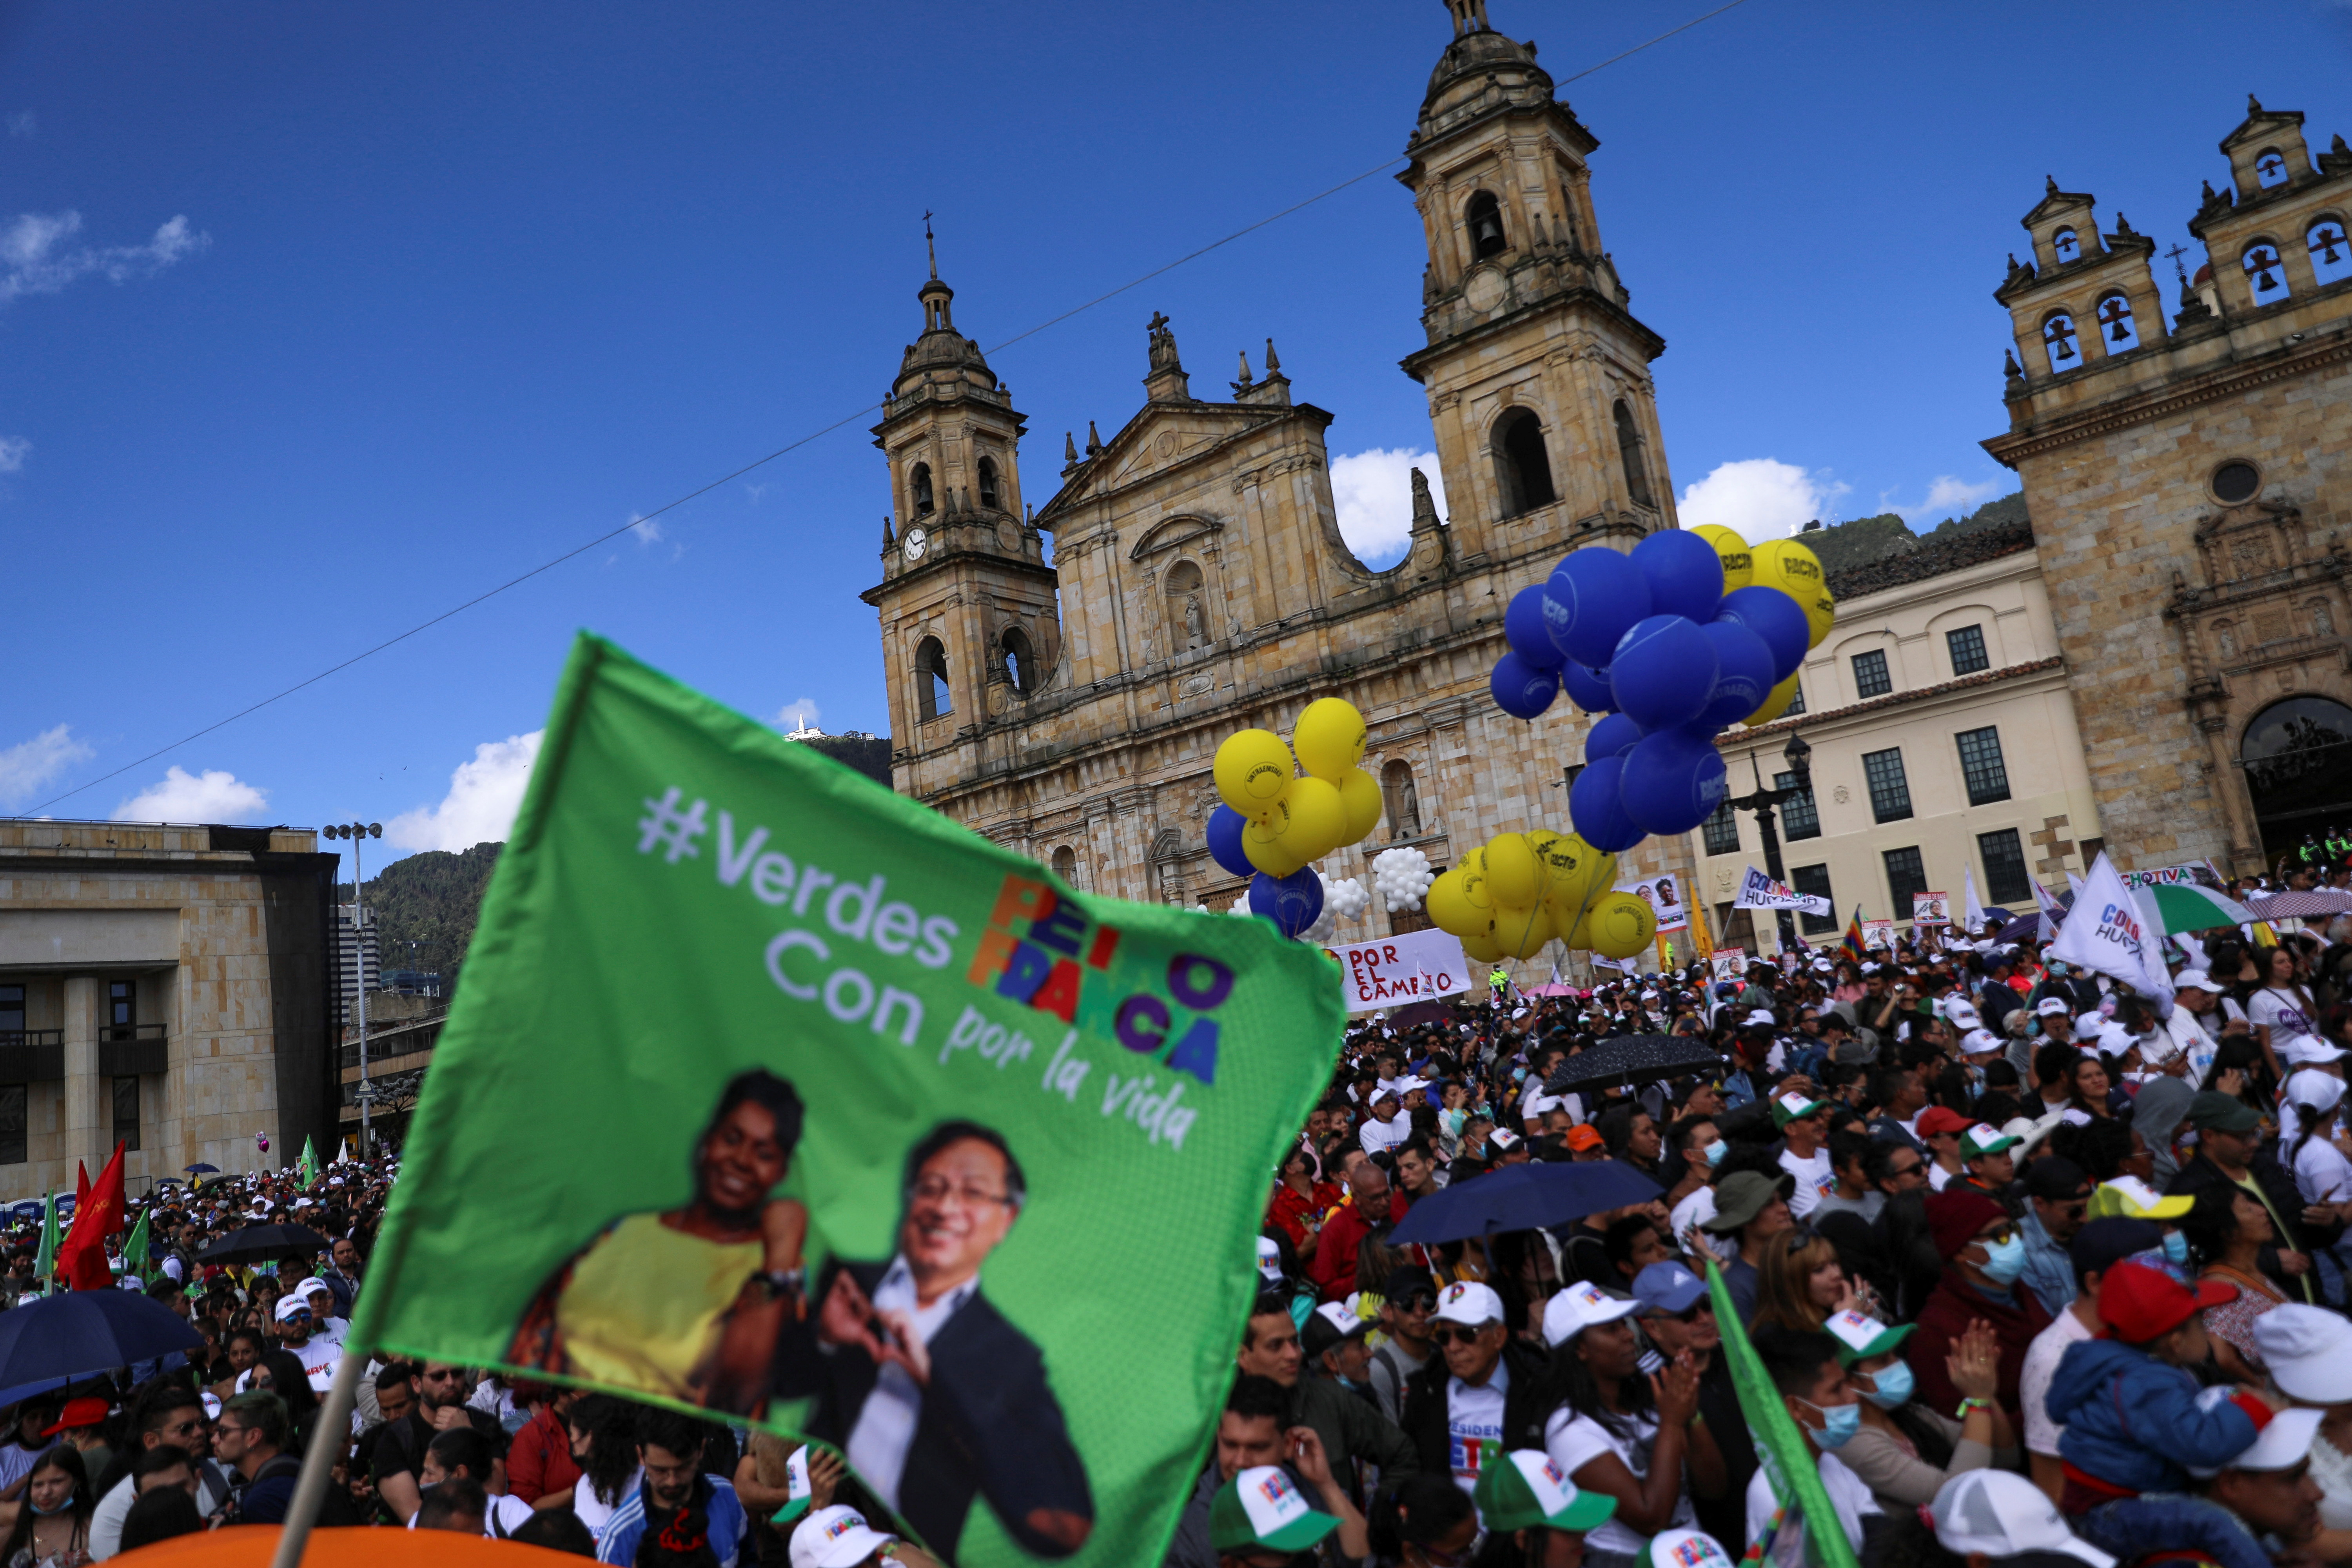 Supporters of Colombian left-wing presidential candidate Gustavo Petro of the Historic Pact coalition gather for his closing campaign rally ahead of the first round of the presidential elections, in Bogota, Colombia May 22, 2022. REUTERS/Luisa Gonzalez